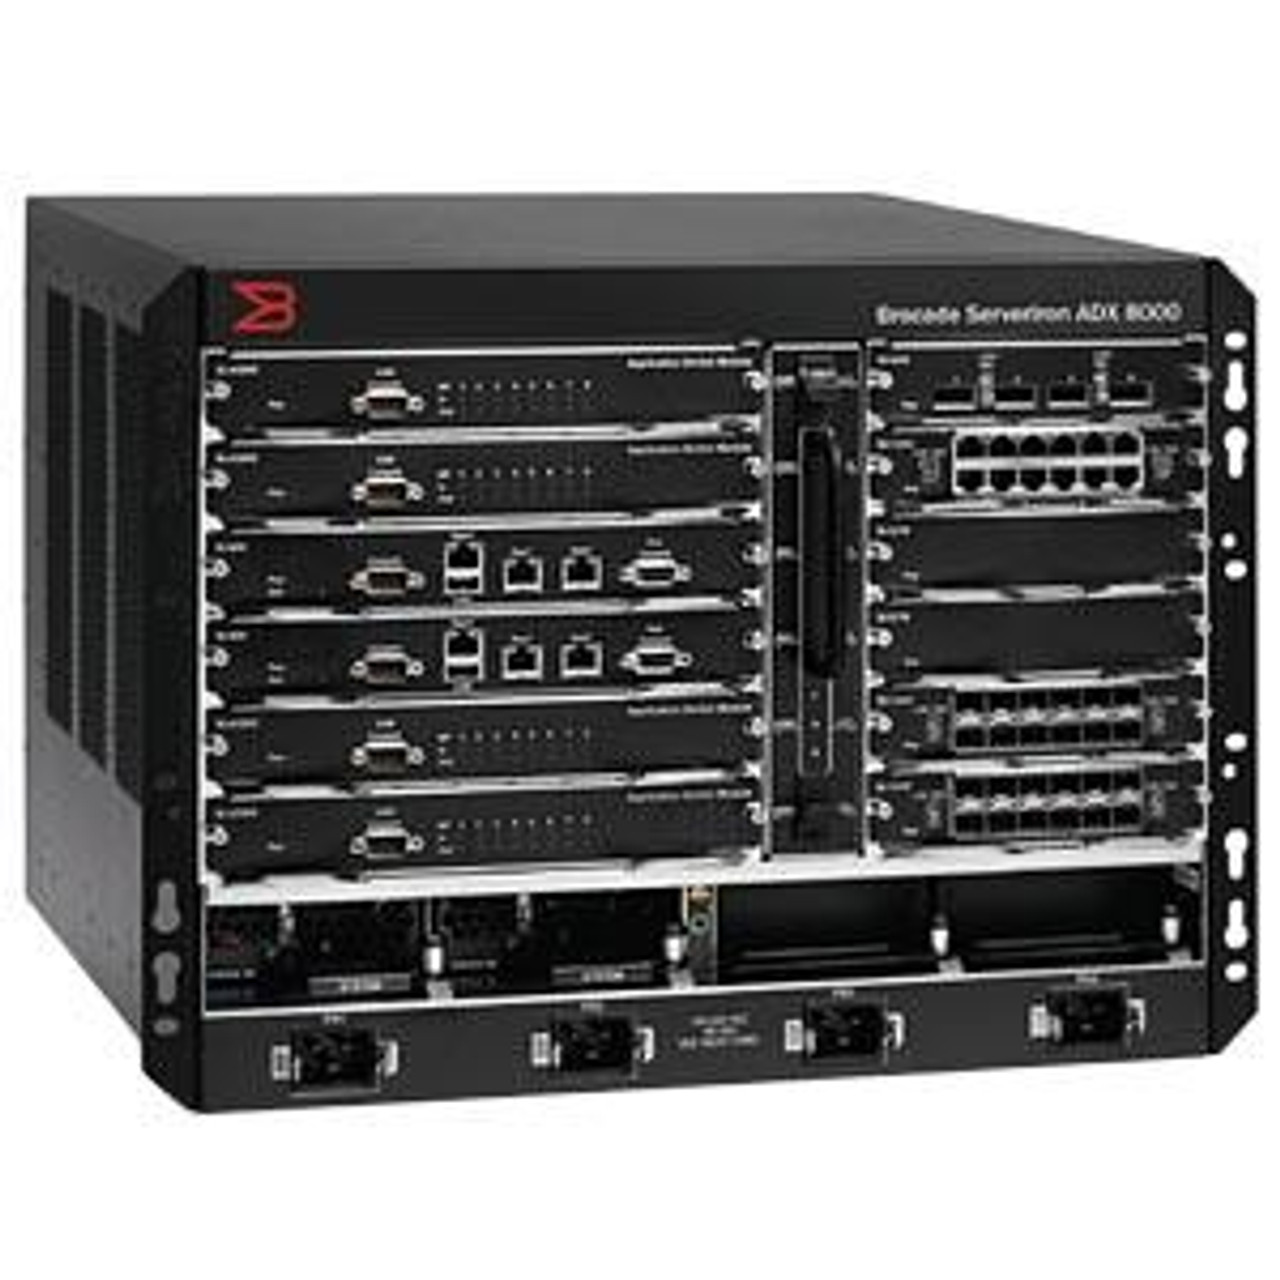 SI-8000 Brocade ServerIron ADX 8000 Switch Chassis 4 x Line Card, 4 x Switching Module, 2 x Switch Fabric Module, 2 x Management Module